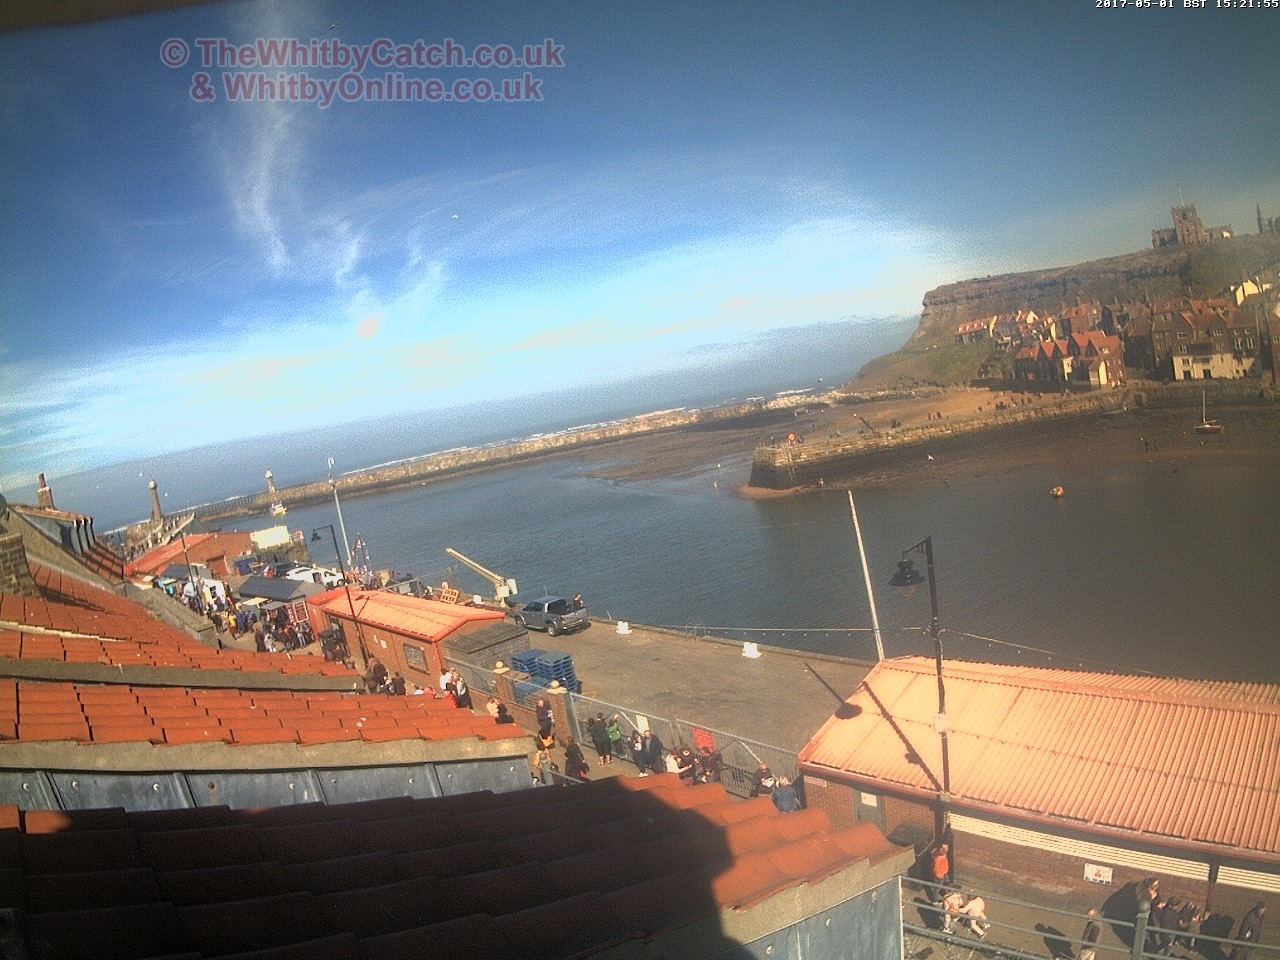 Whitby Mon 1st May 2017 15:22.